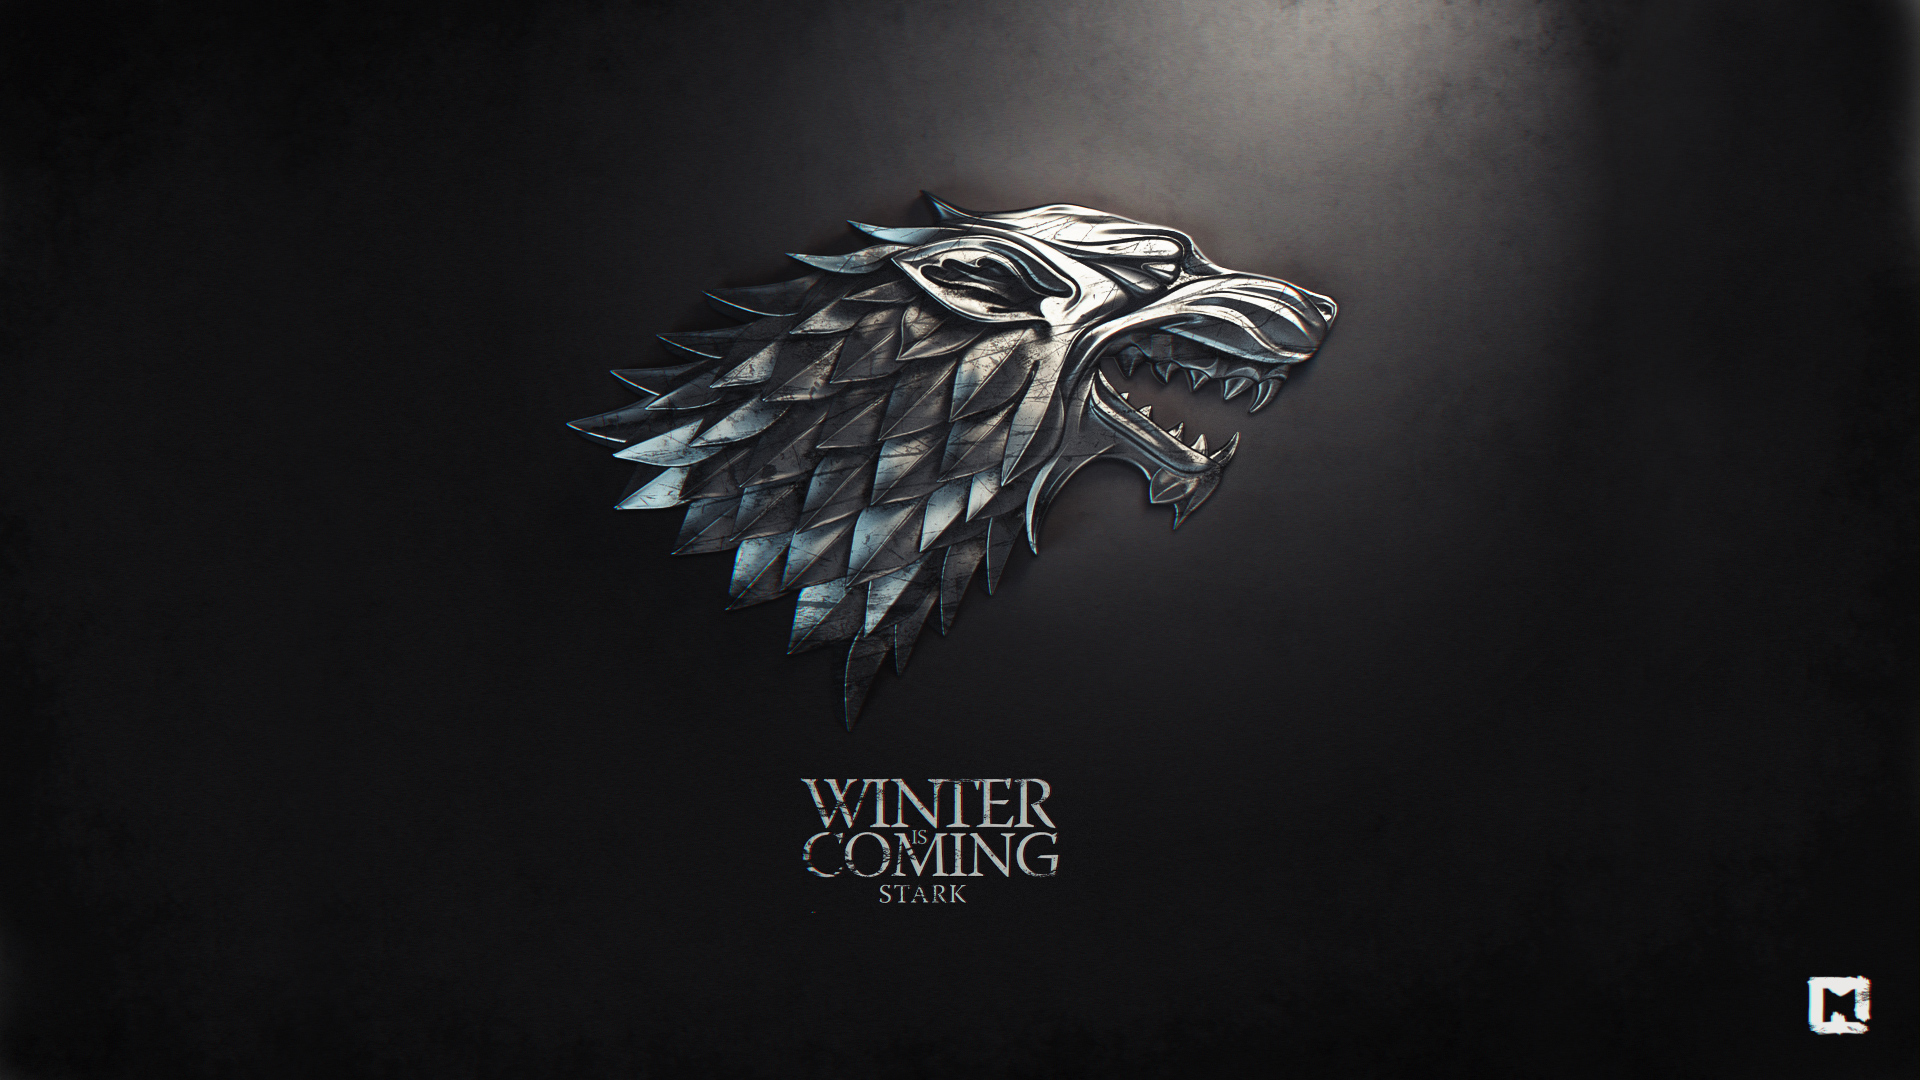 Game Of Thrones Wallpaper HD